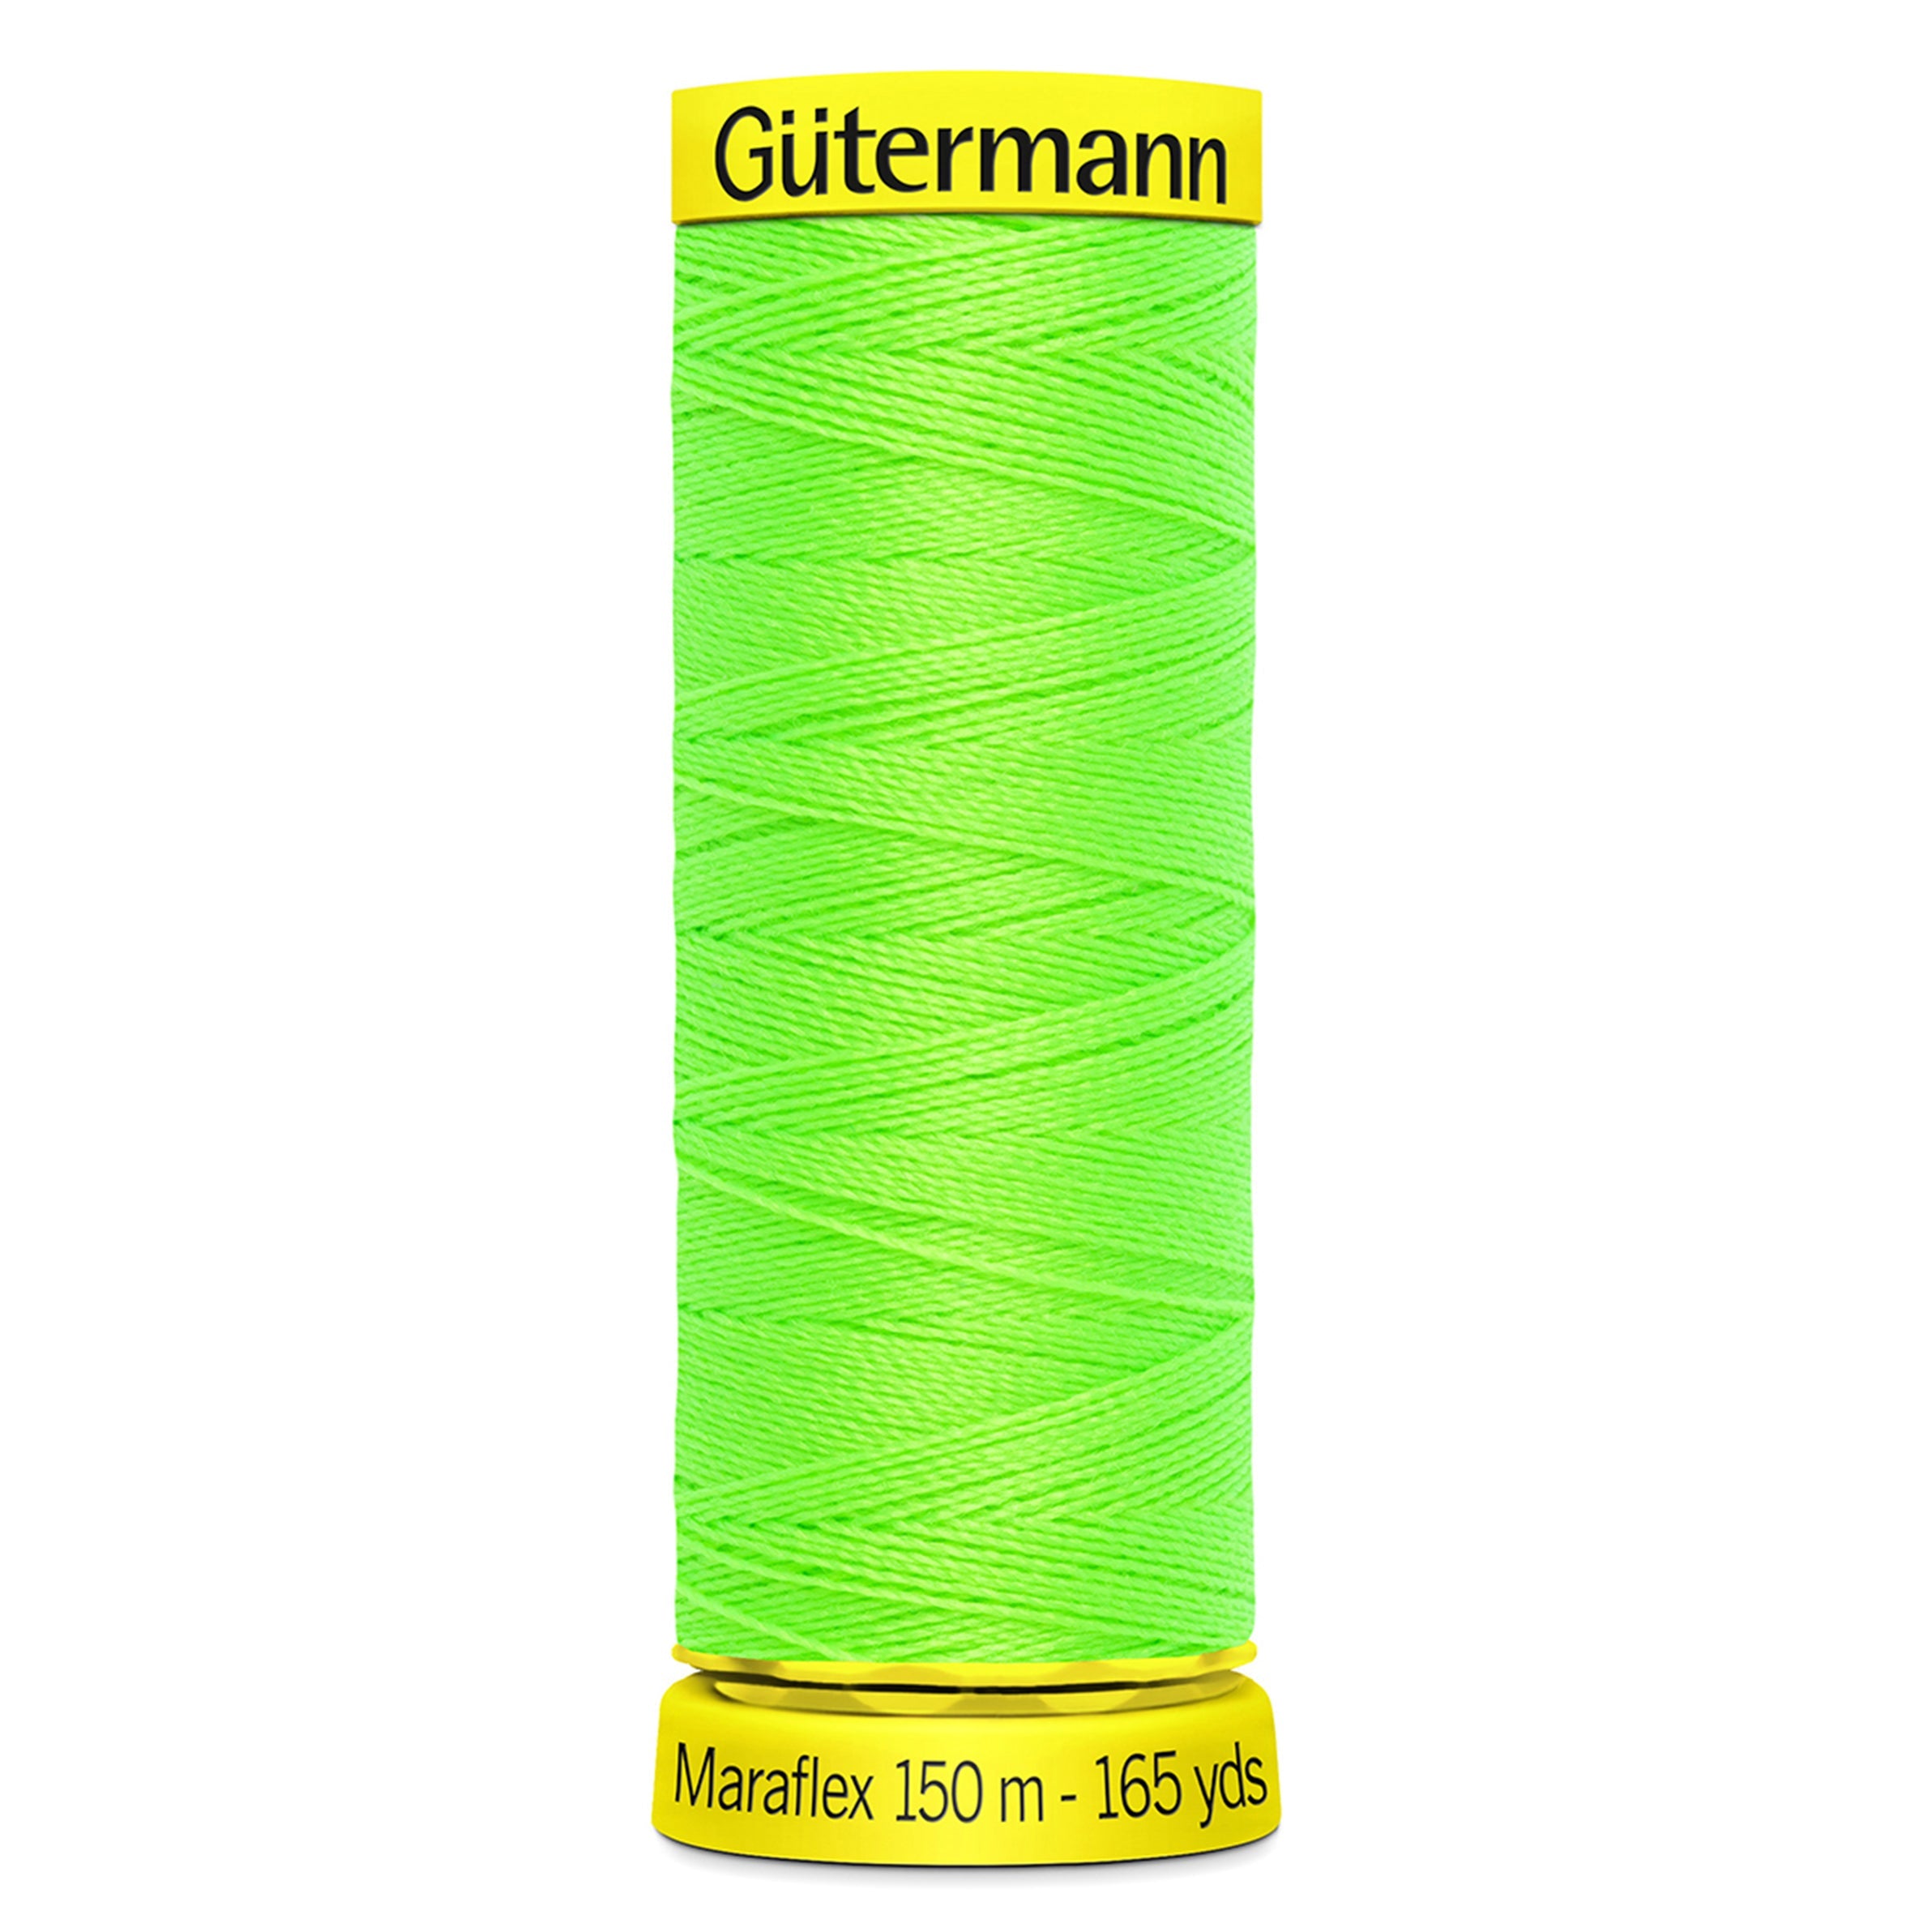 Gutermann Maraflex Stretchy Sewing Thread 150m colour 3853 Neon Green from Jaycotts Sewing Supplies